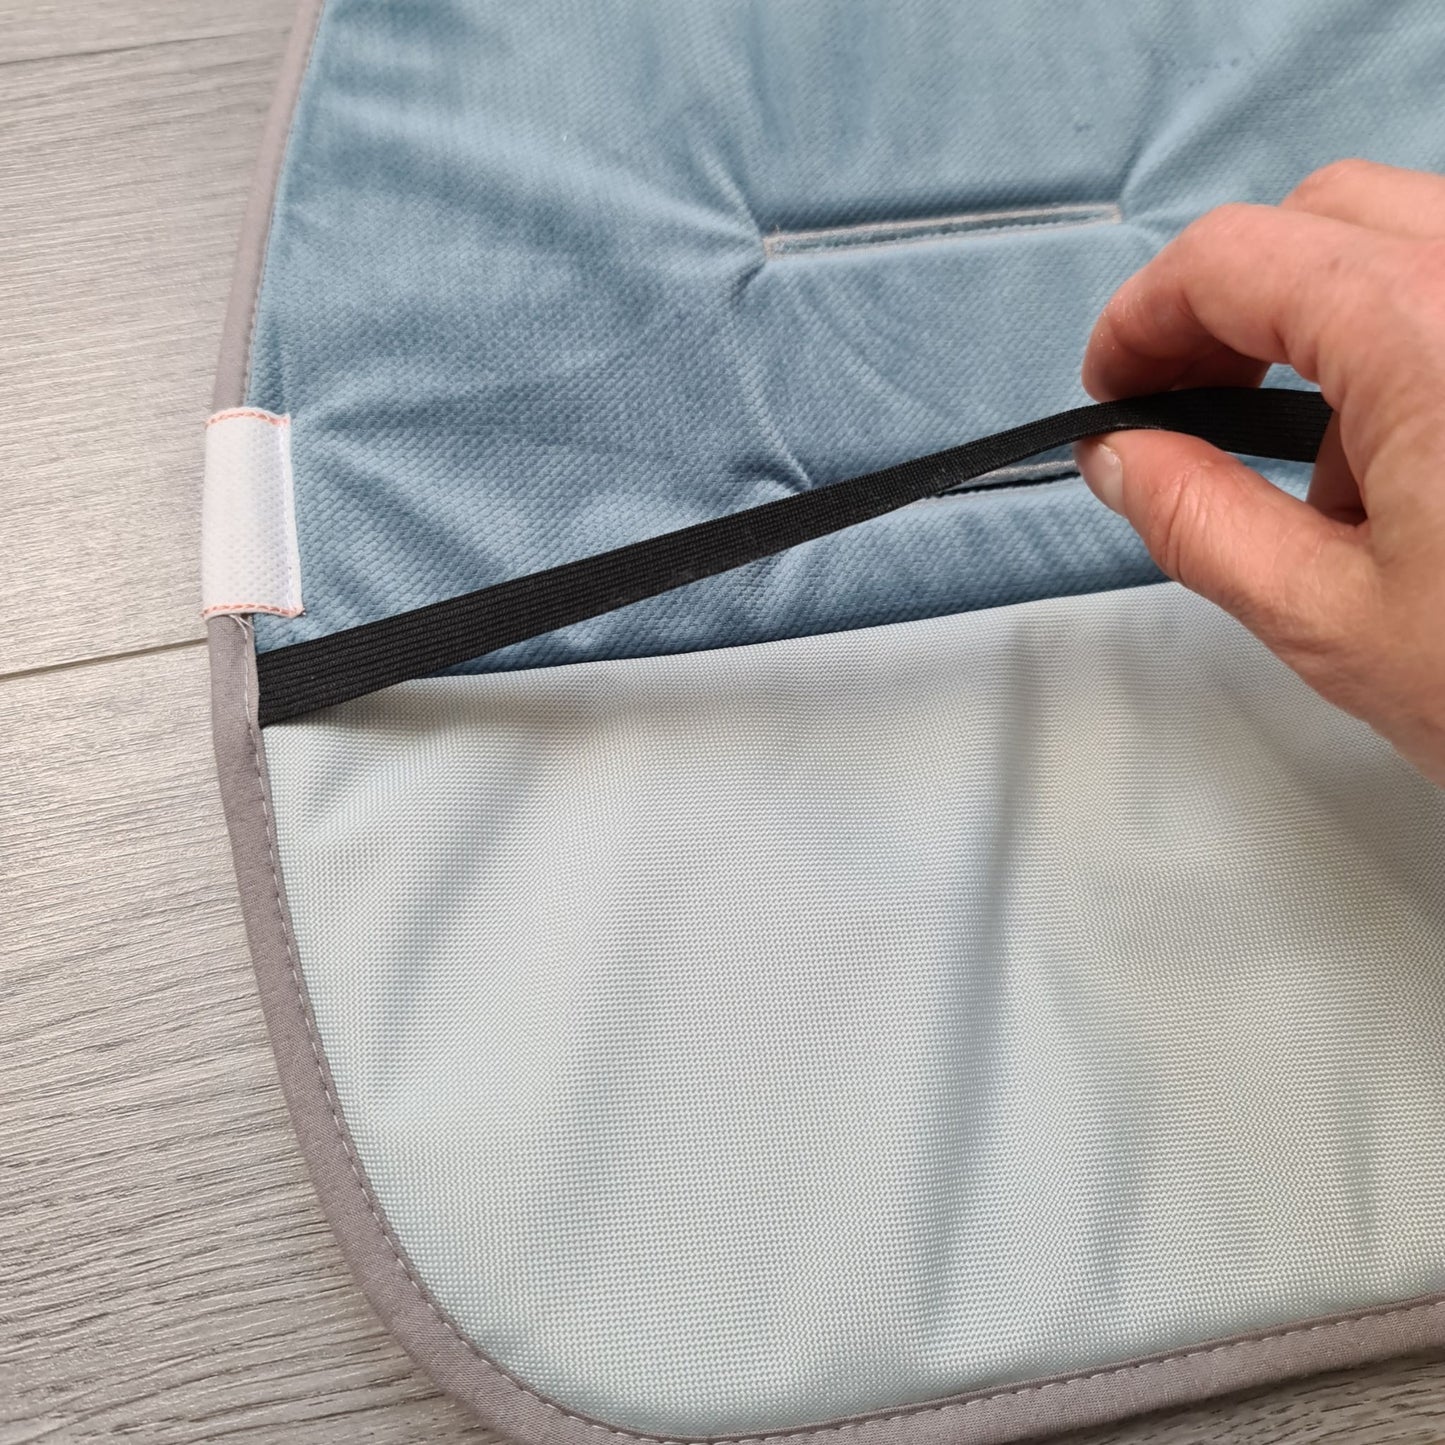 liner for strollers with robber band to secure the liner in place